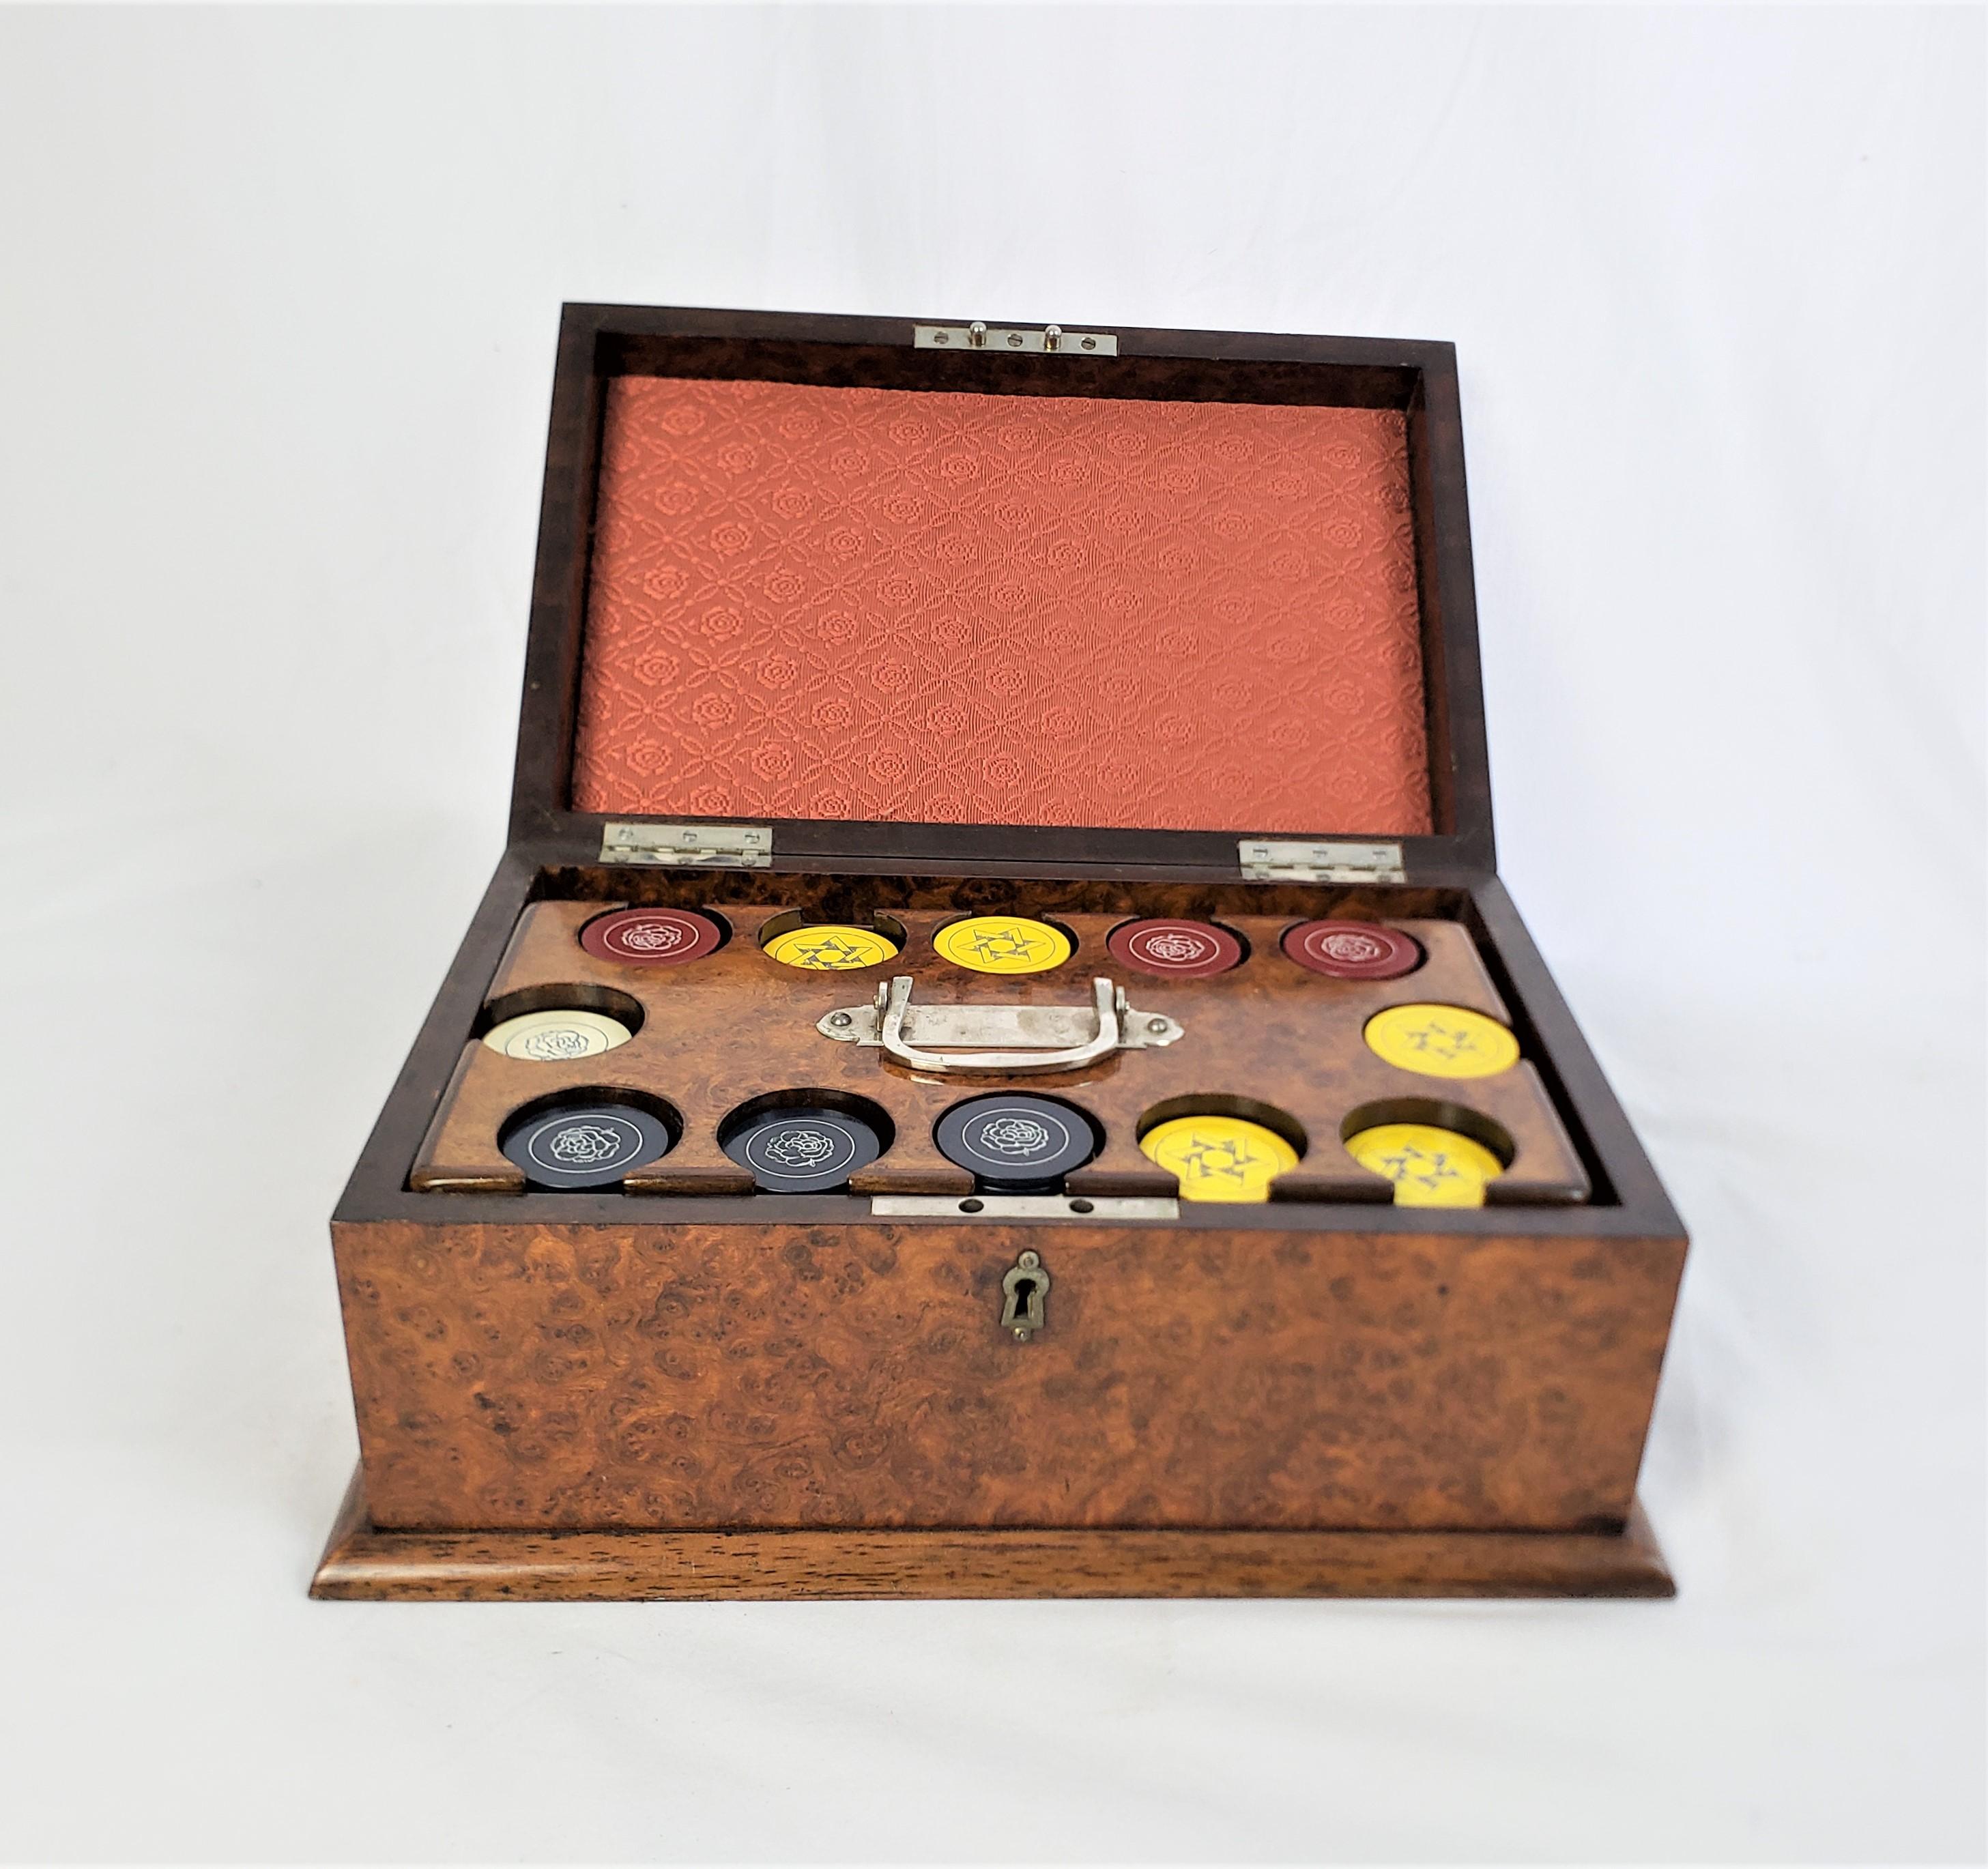 This antique card and poker chip box is unsigned, but presumed to have originated from England and date to approximately 1900 and done in the period Edwardian style. The box is composed of walnut and features a fitted walnut pull out carousel for